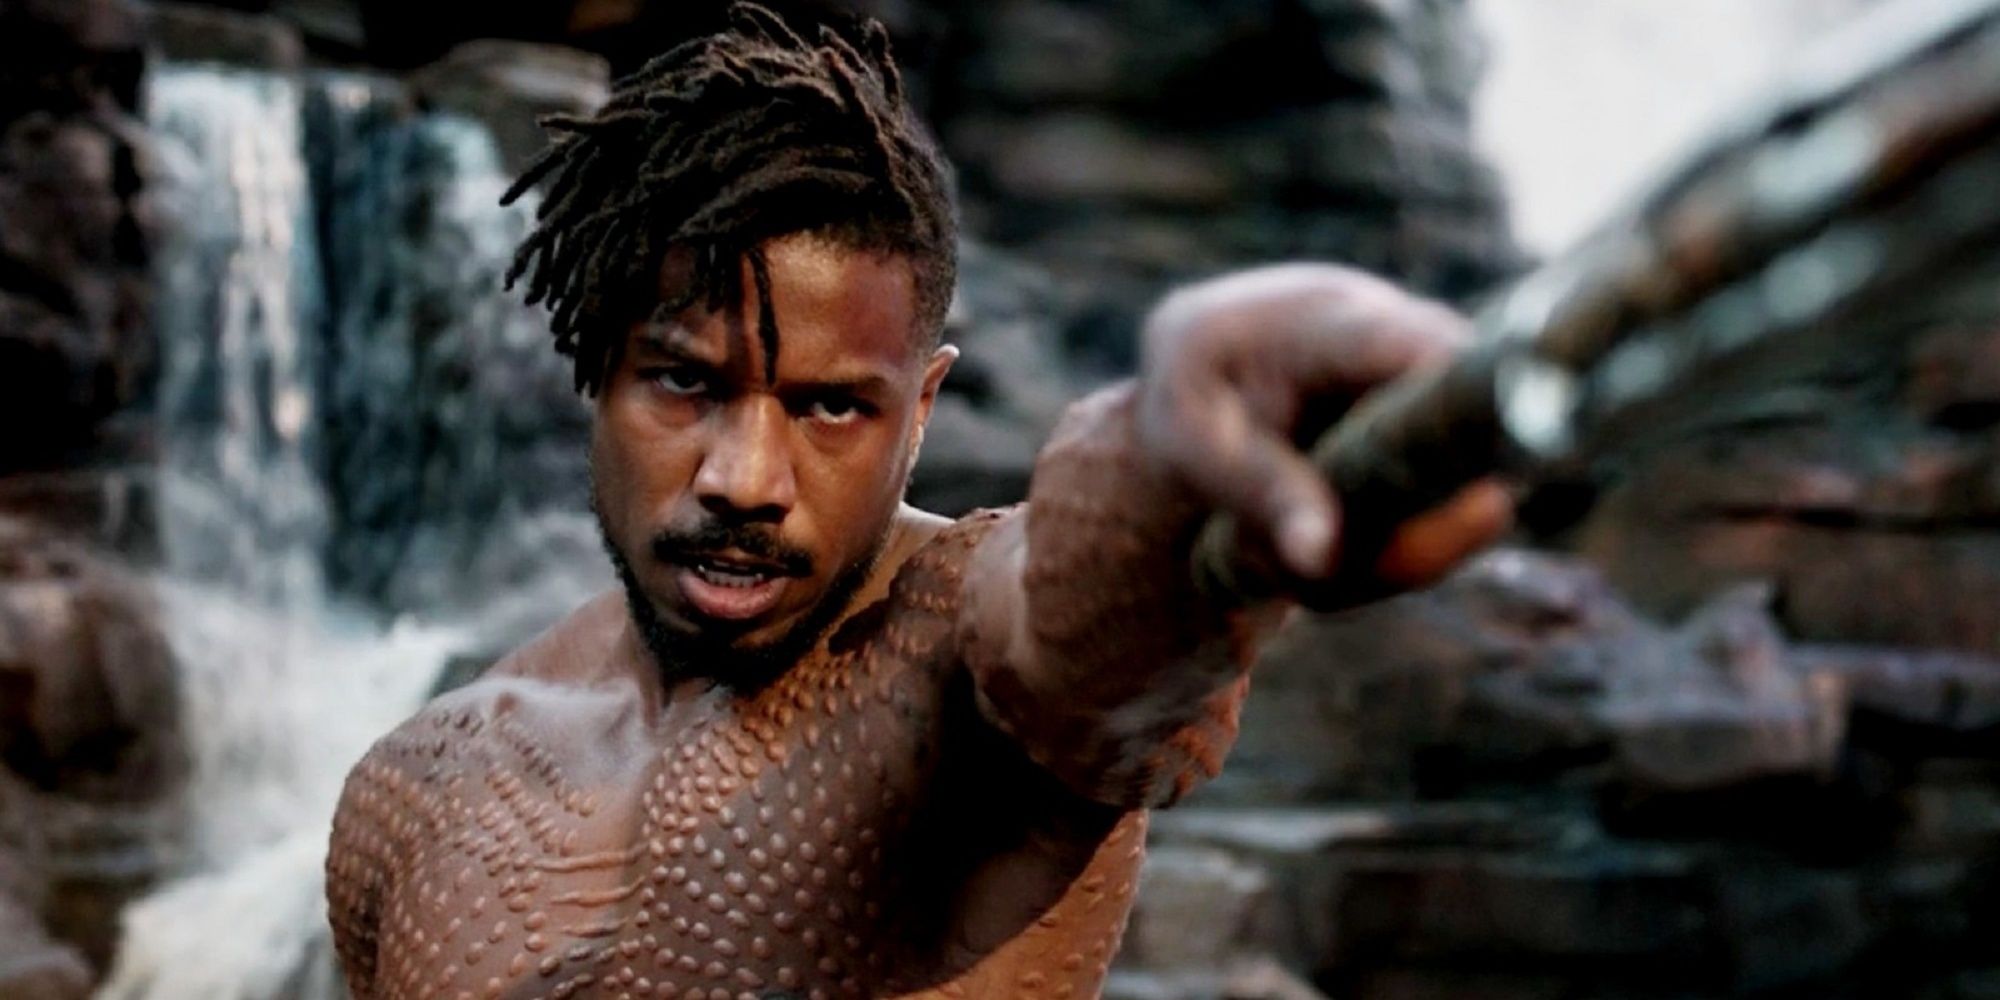 Erik Killmonger challenges T'Challa to a duel above the waterfall.